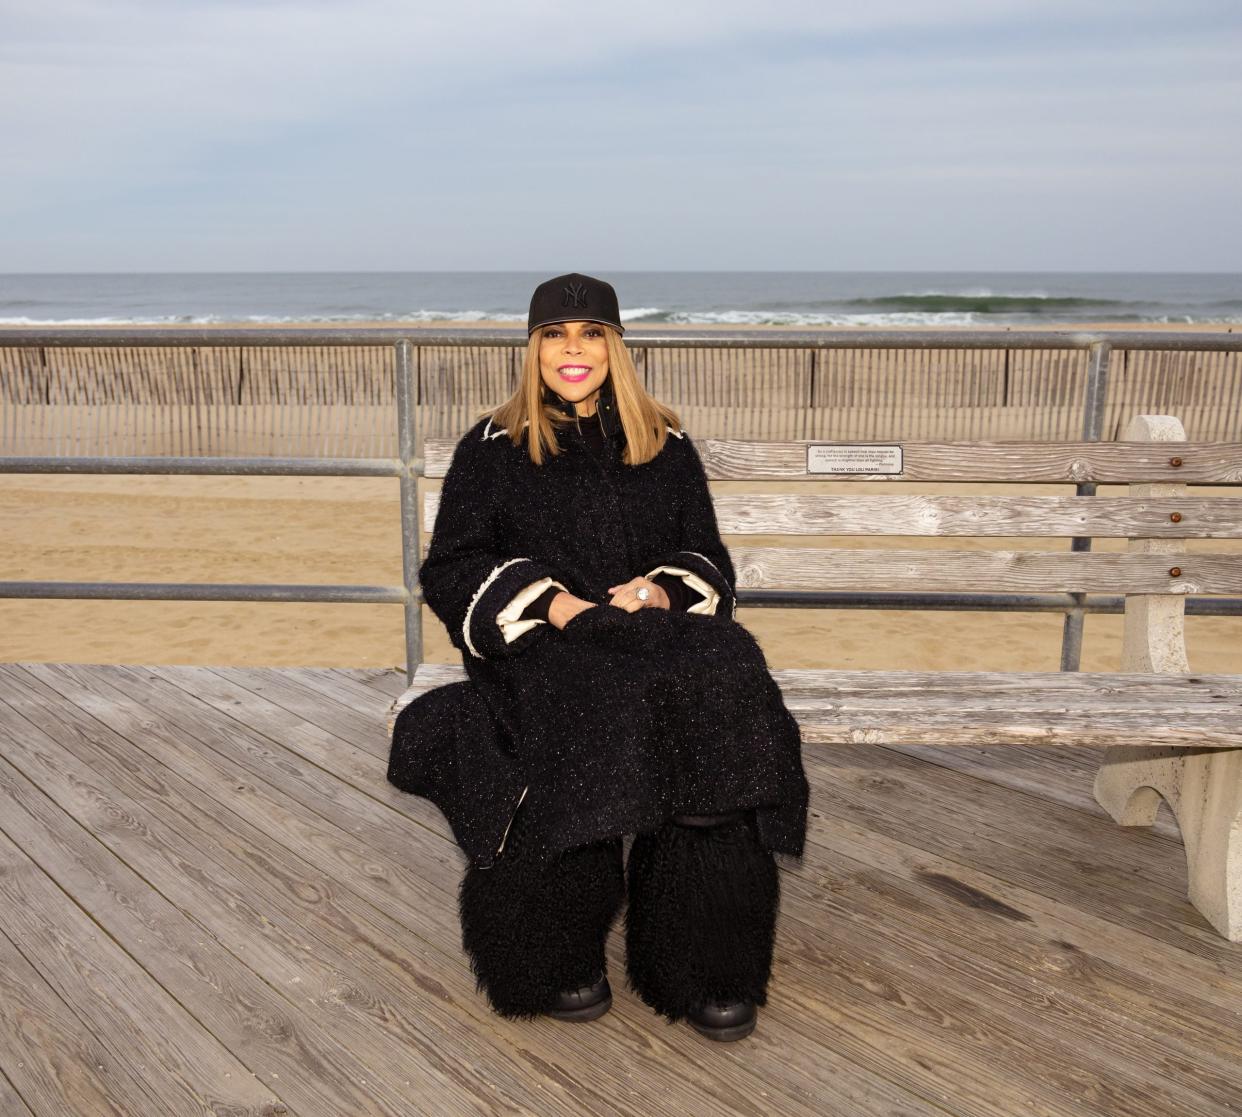 Wendy Williams seated on a boardwalk by the beach.